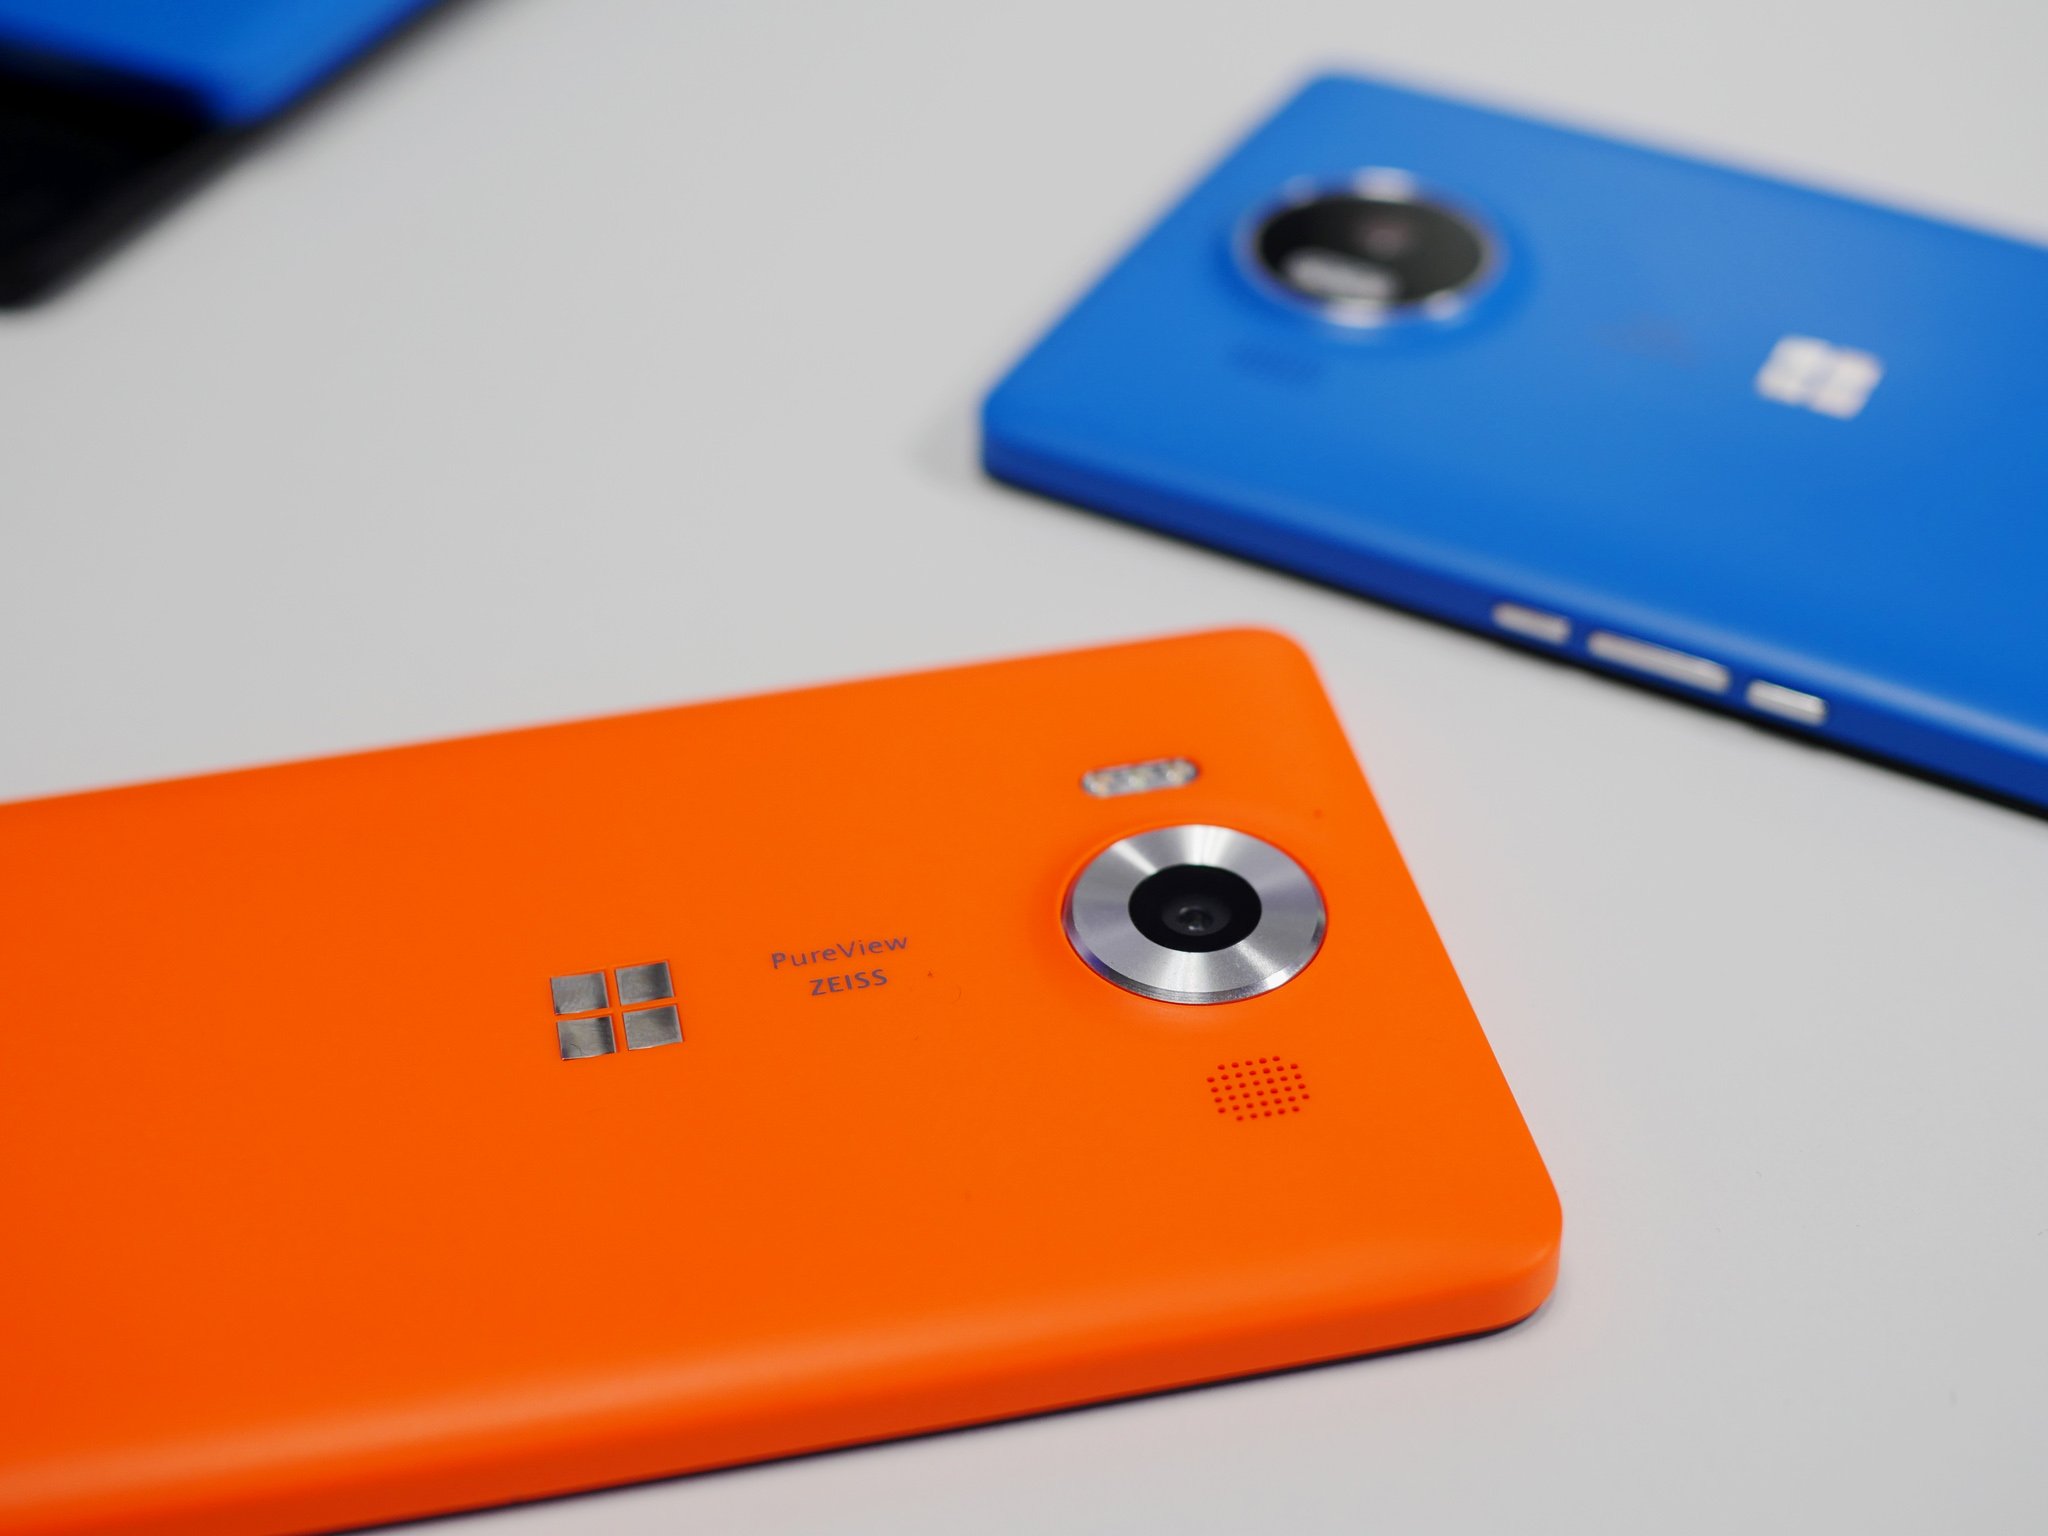 Orange and Blue replacement covers for the Lumia 950